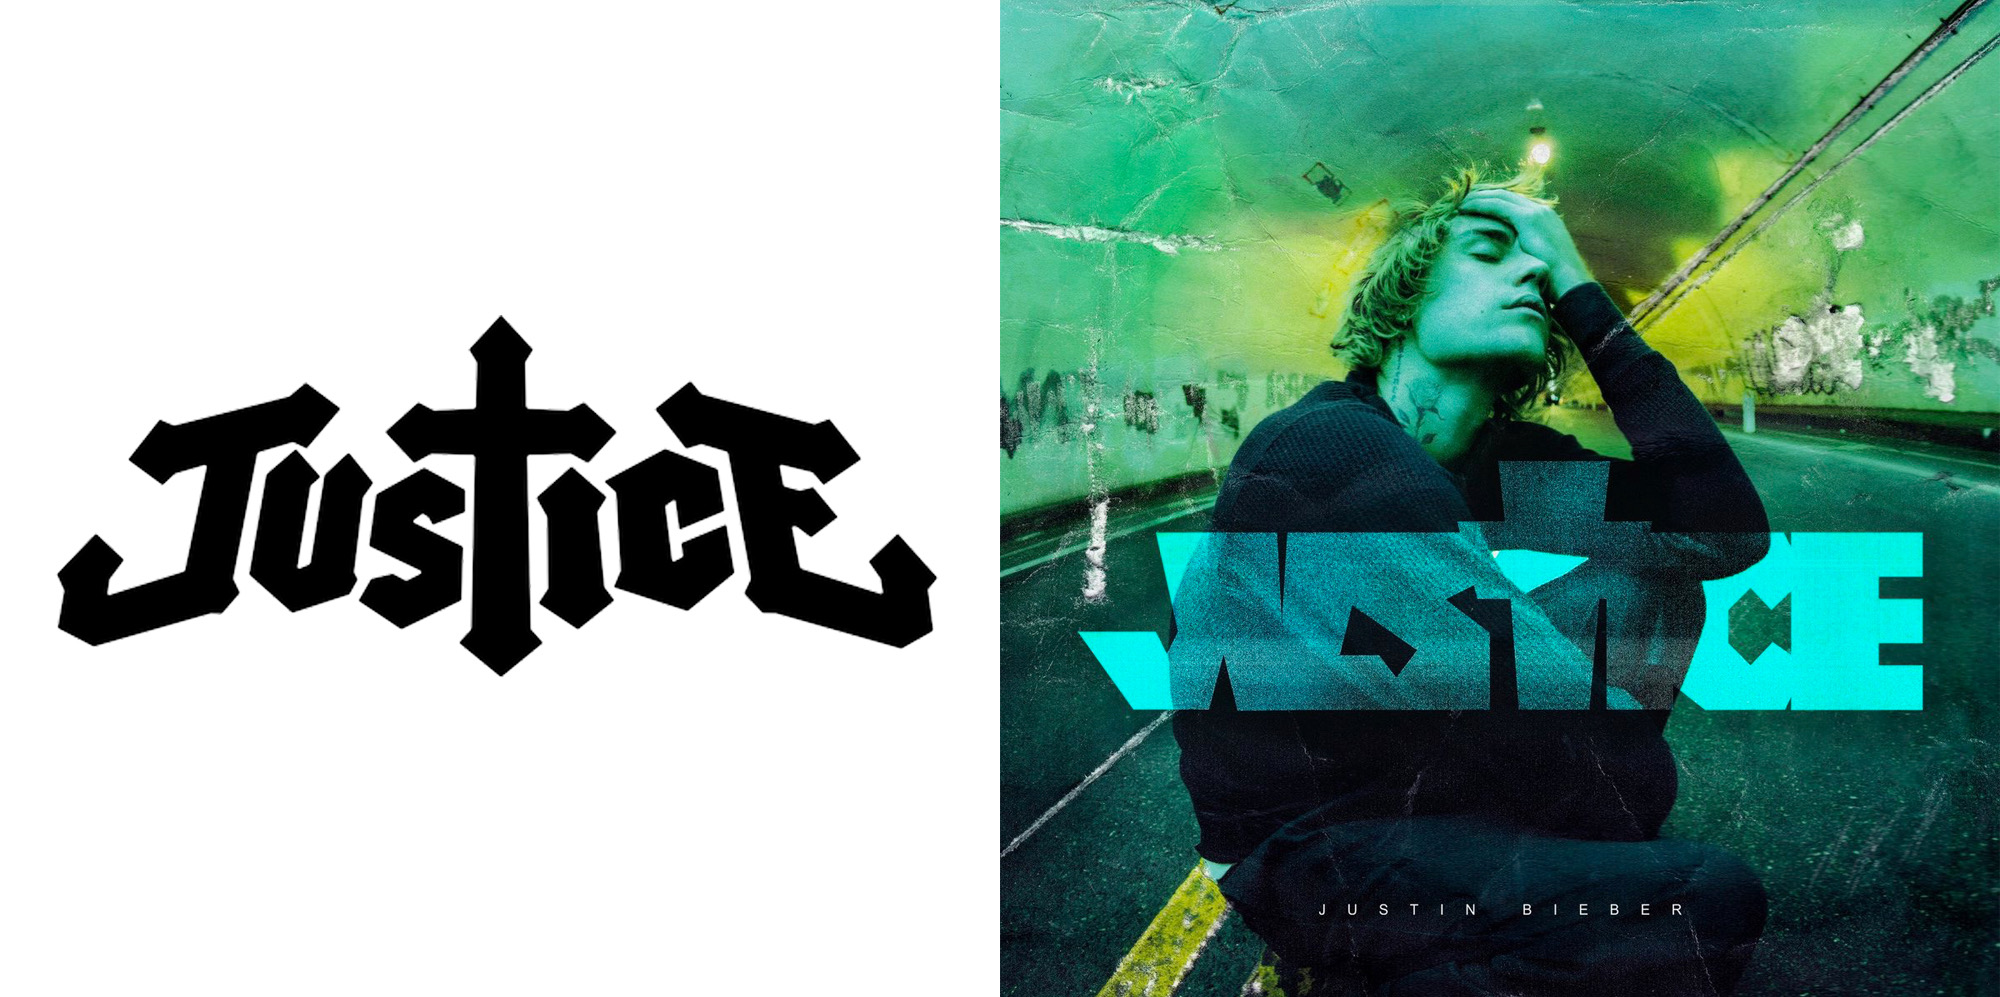 Justice Preview New LP With Tame Impala Collab 'One Night/All Night'